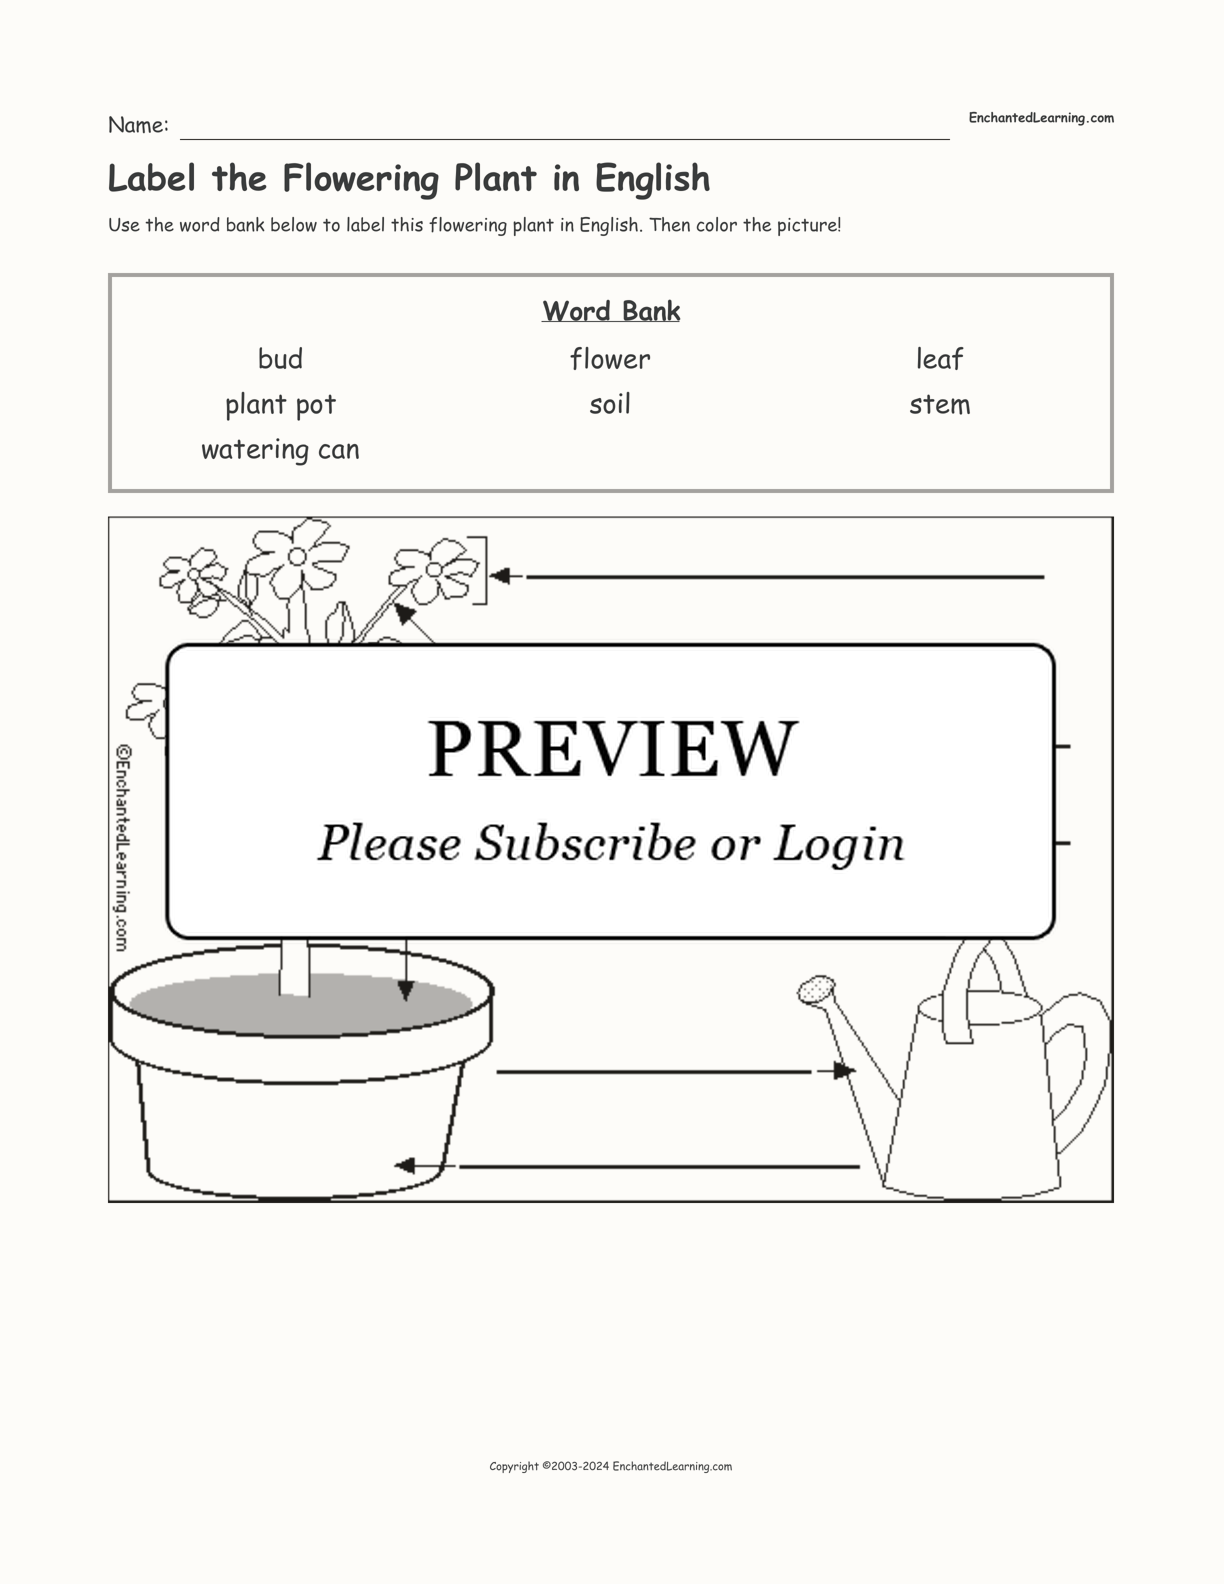 Label the Flowering Plant in English interactive worksheet page 1